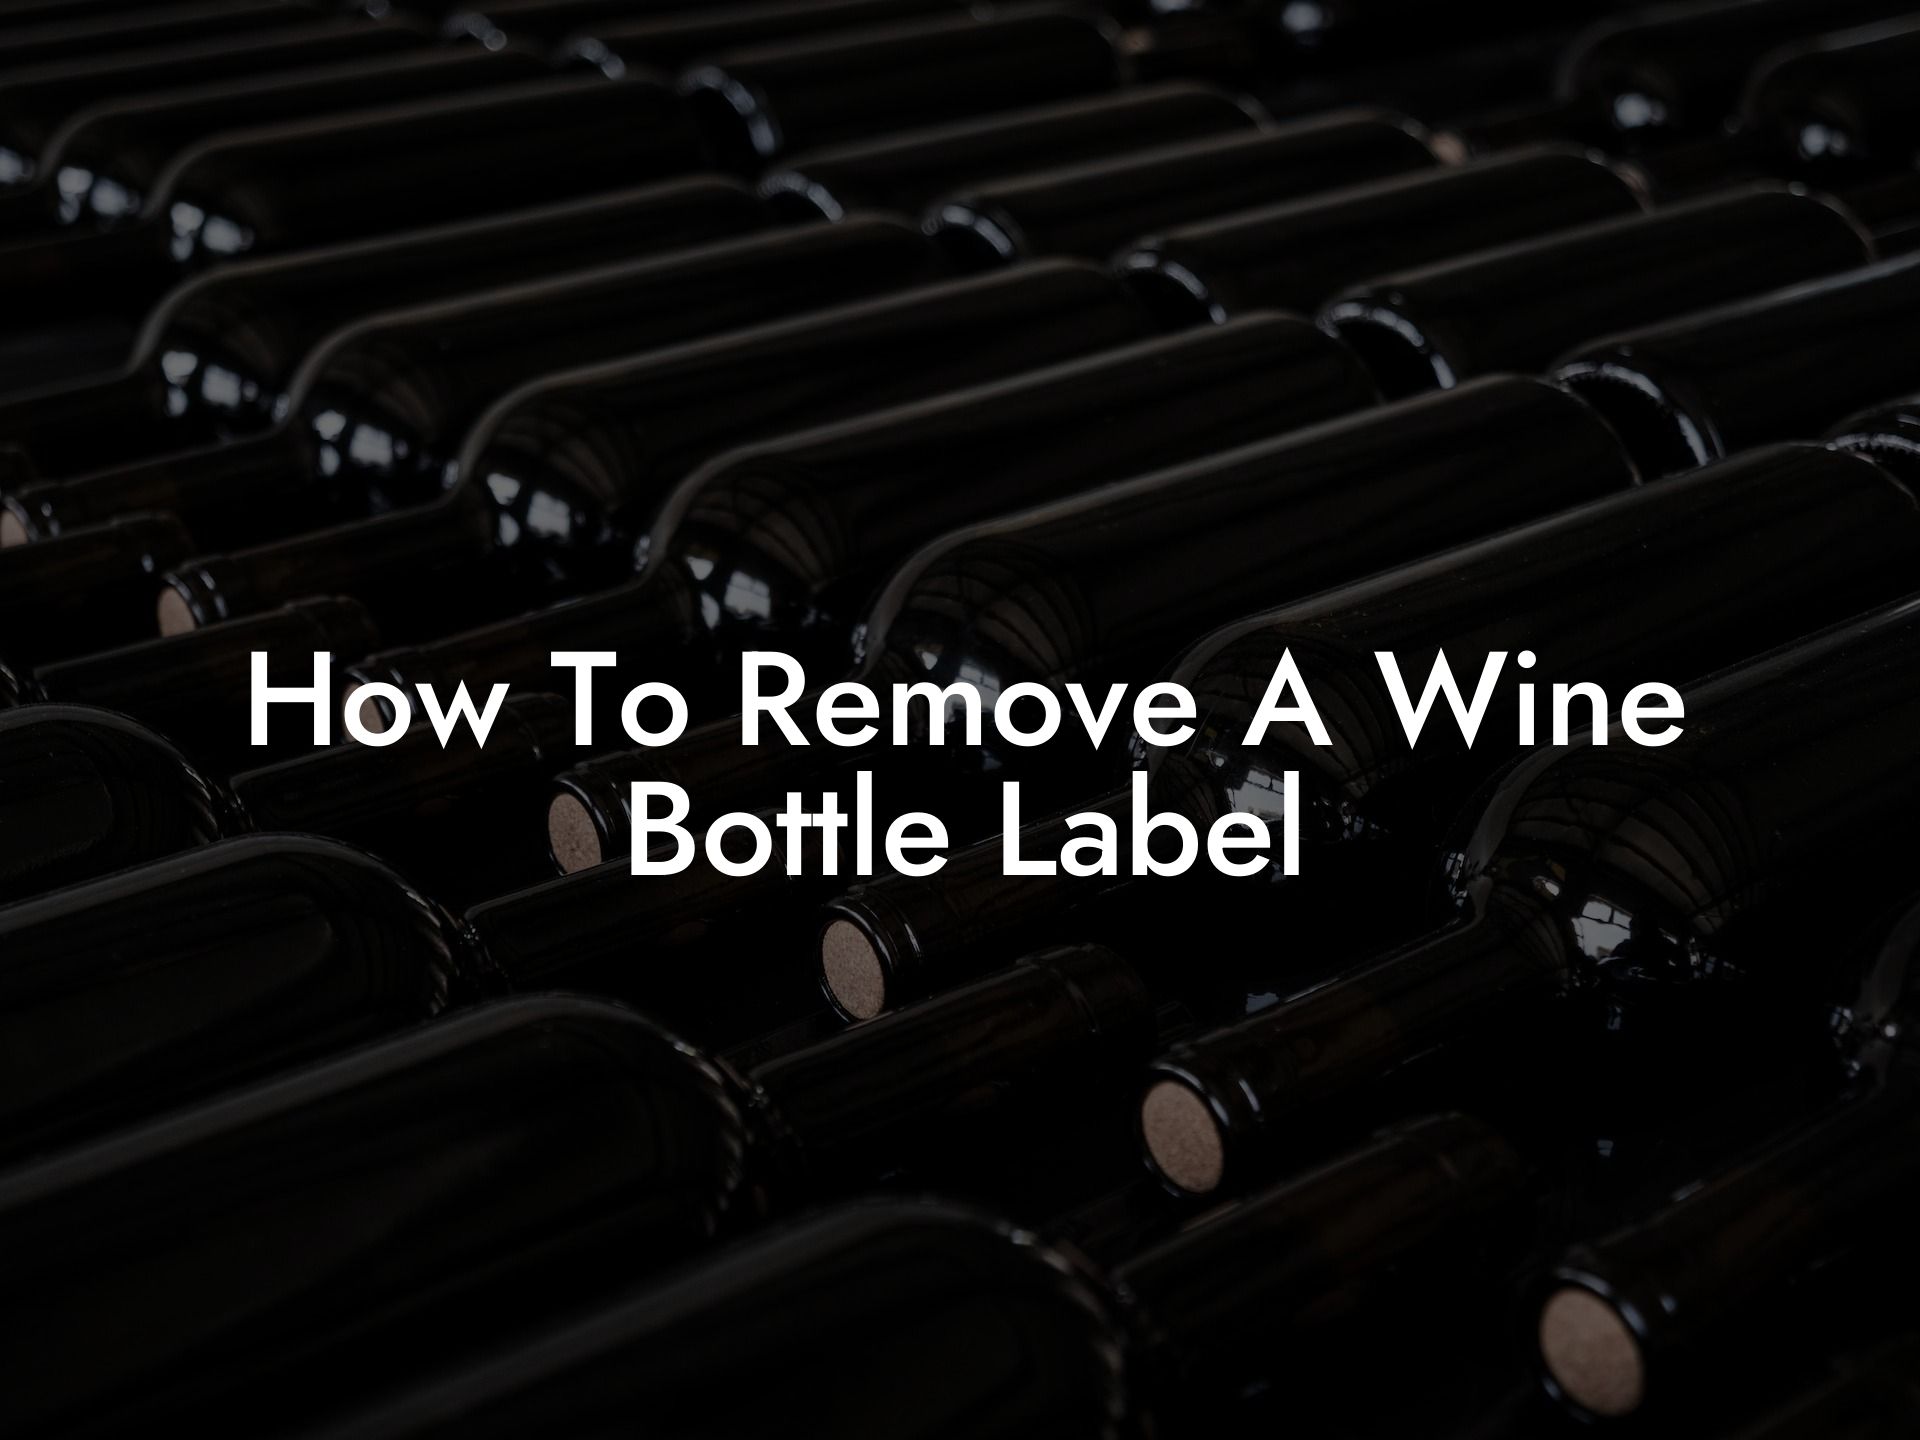 How To Remove A Wine Bottle Label